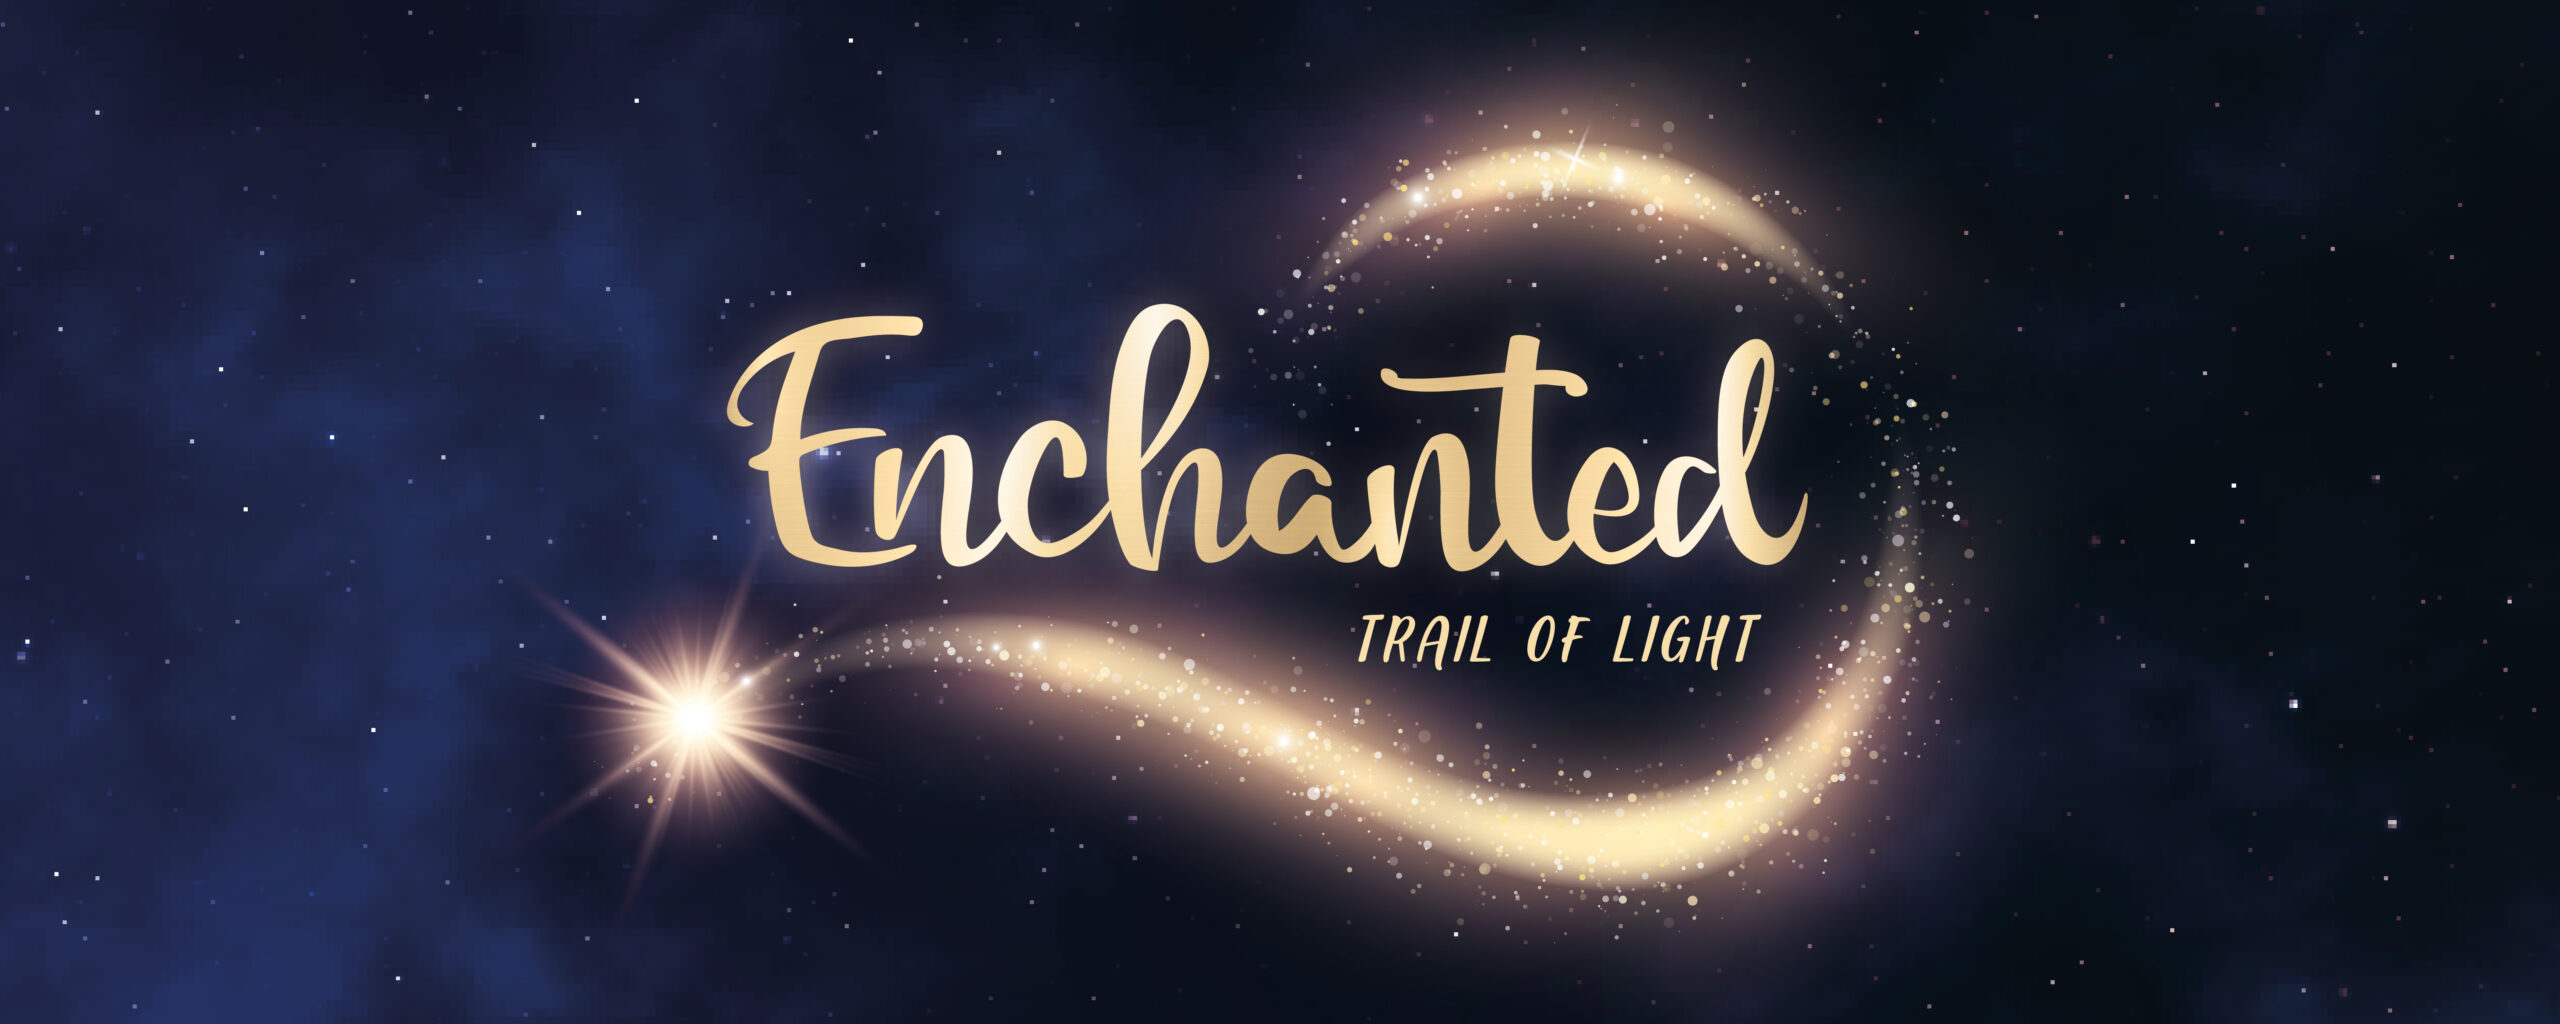 Enchanted Trail of Light – 20th December